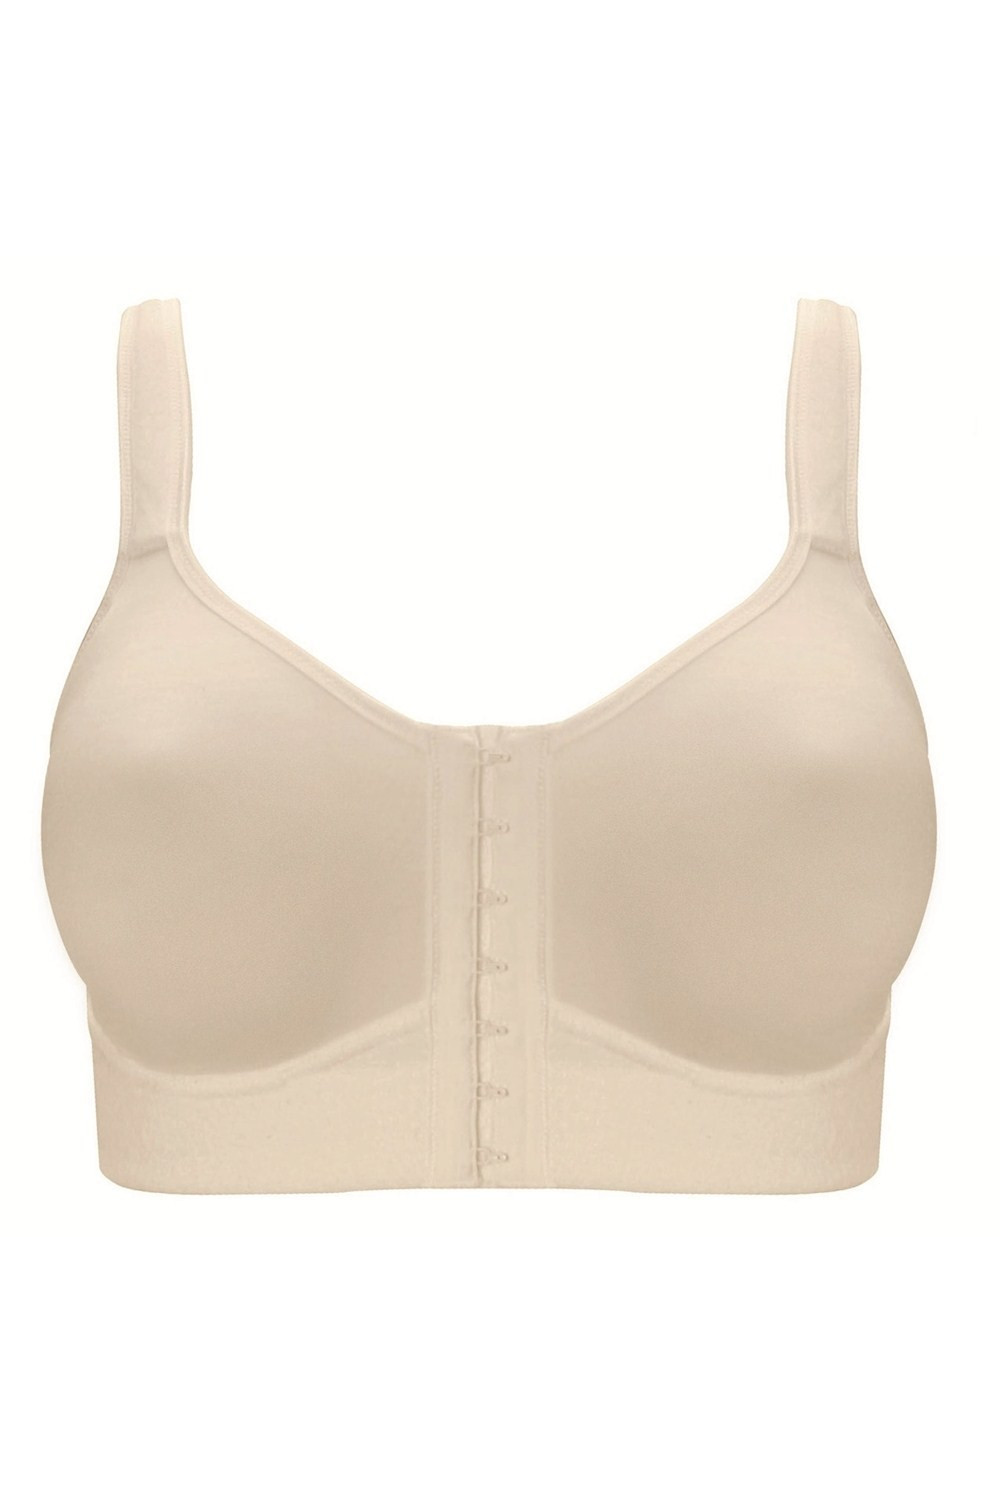 Cotton Sports Bras for Mastectomy Women Front Closure Everyday Post Surgery  Bra with Pockets for Breast Forms (Color : Beige, Size : 95/42ABC)